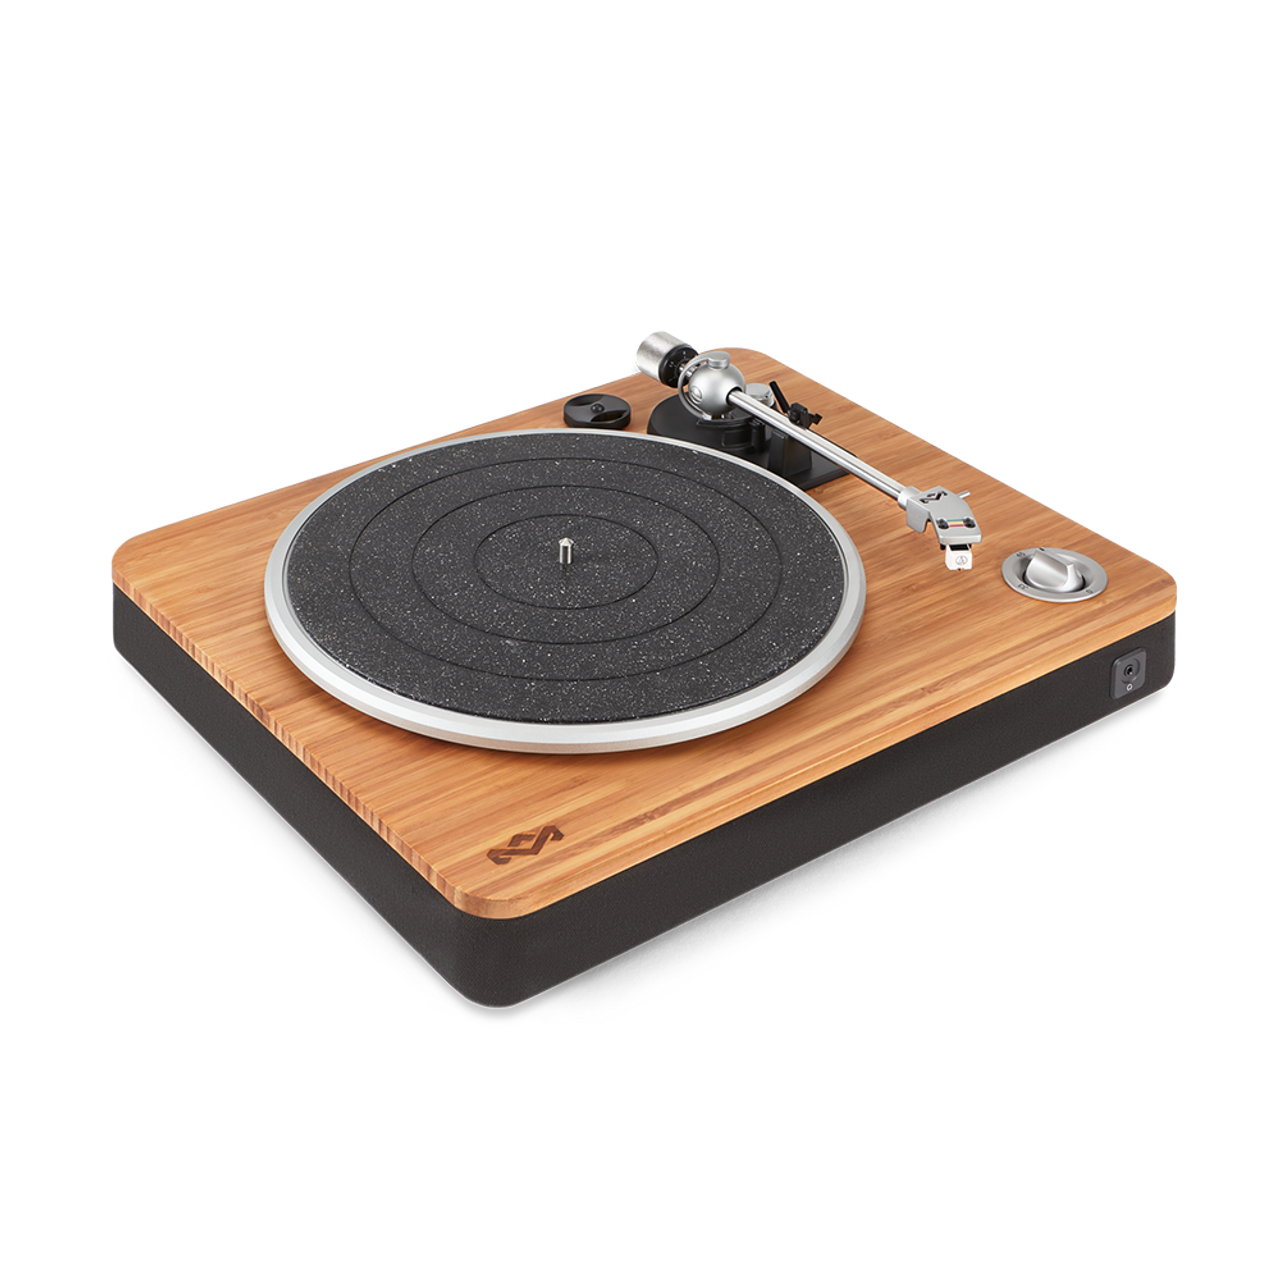 Small motorized turntable used to capture videos and photos of the